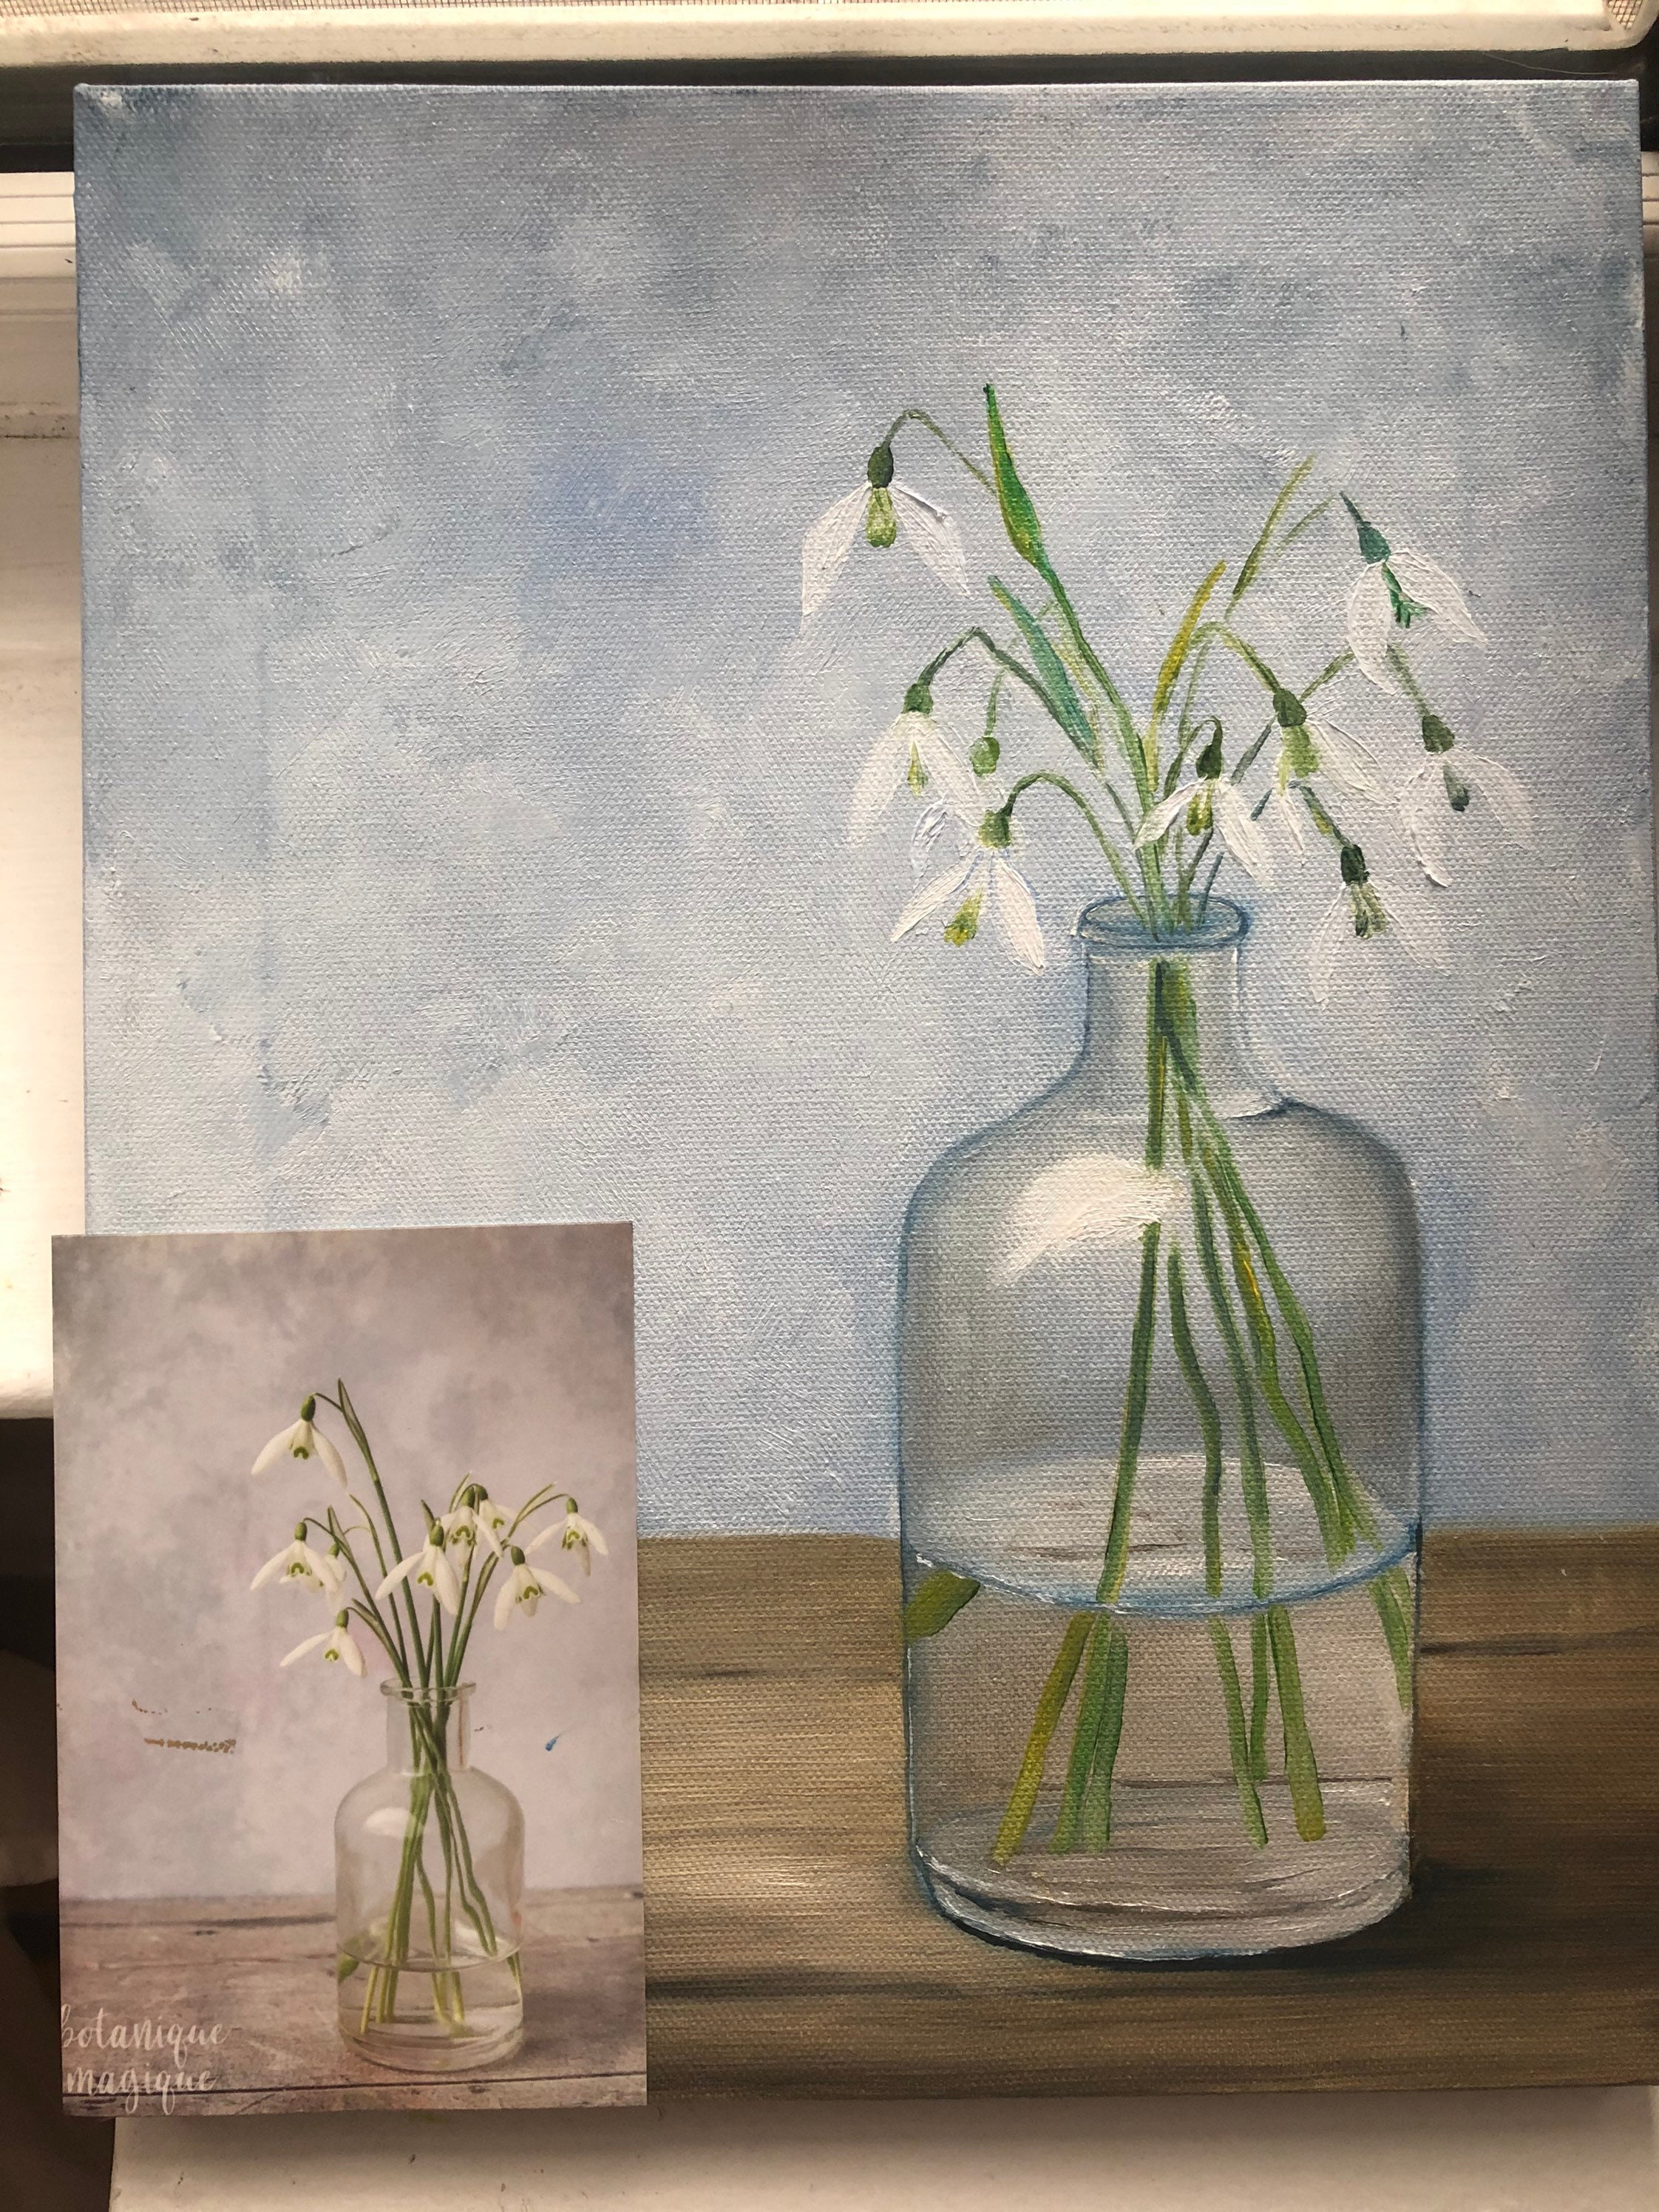 oil on canvas snow drops on the painting still life with flowers texture oil painting still life for dinner room. Original oil painting